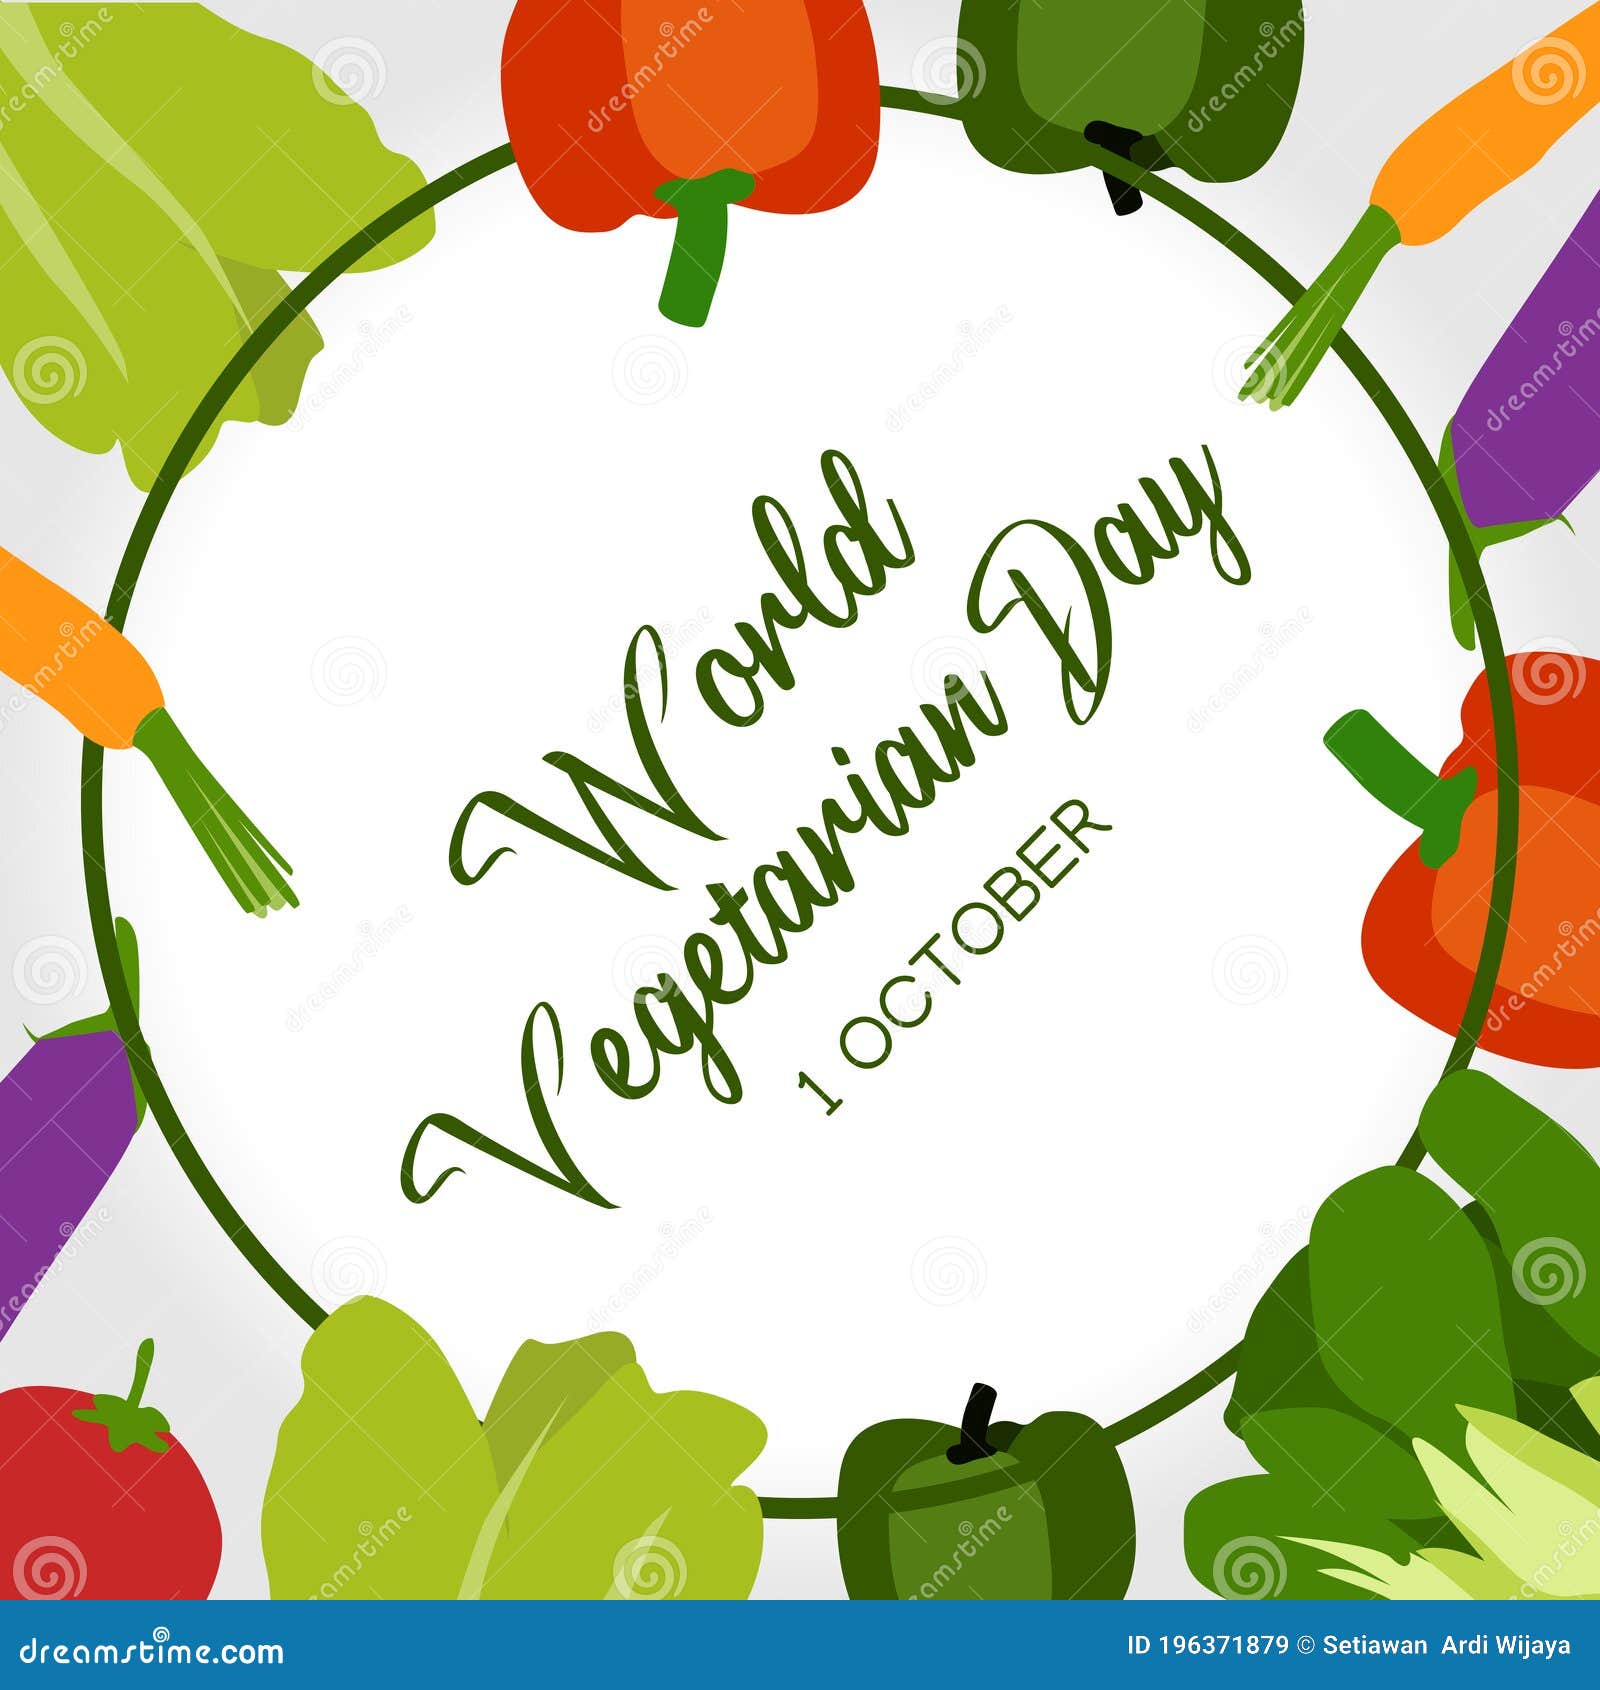 Vector Graphic of World Vegetarian Day Good for World Vegetarian Day